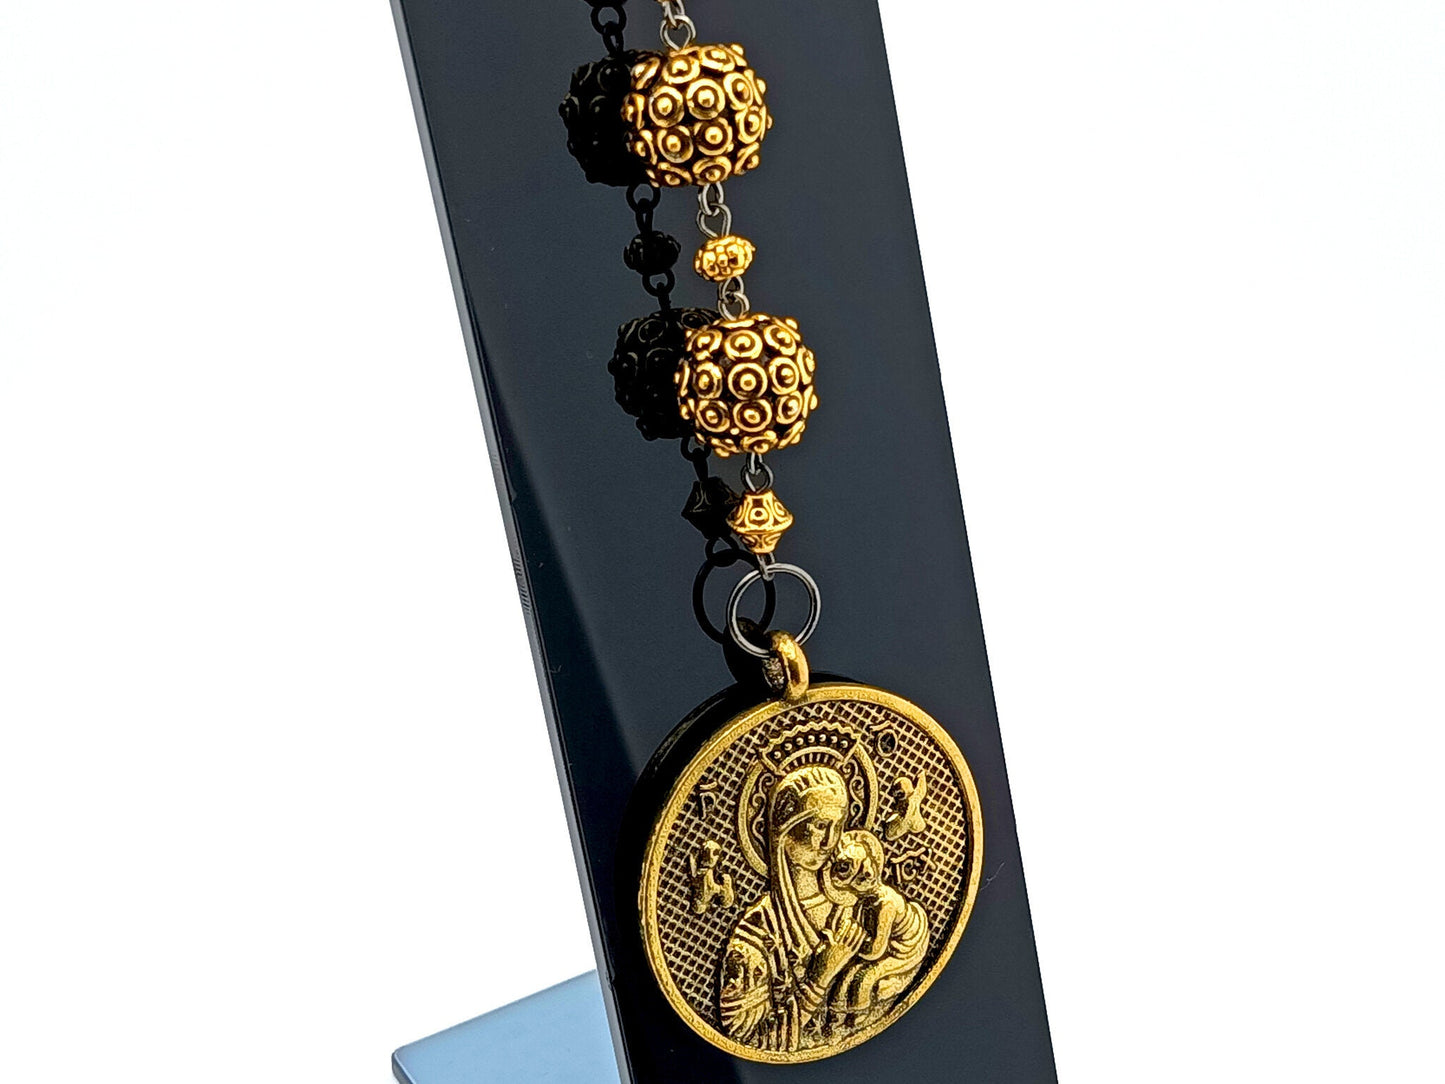 Our Lady of Succor unique rosary beads three Hail Marys purse clip with golden beads, medal and clip.